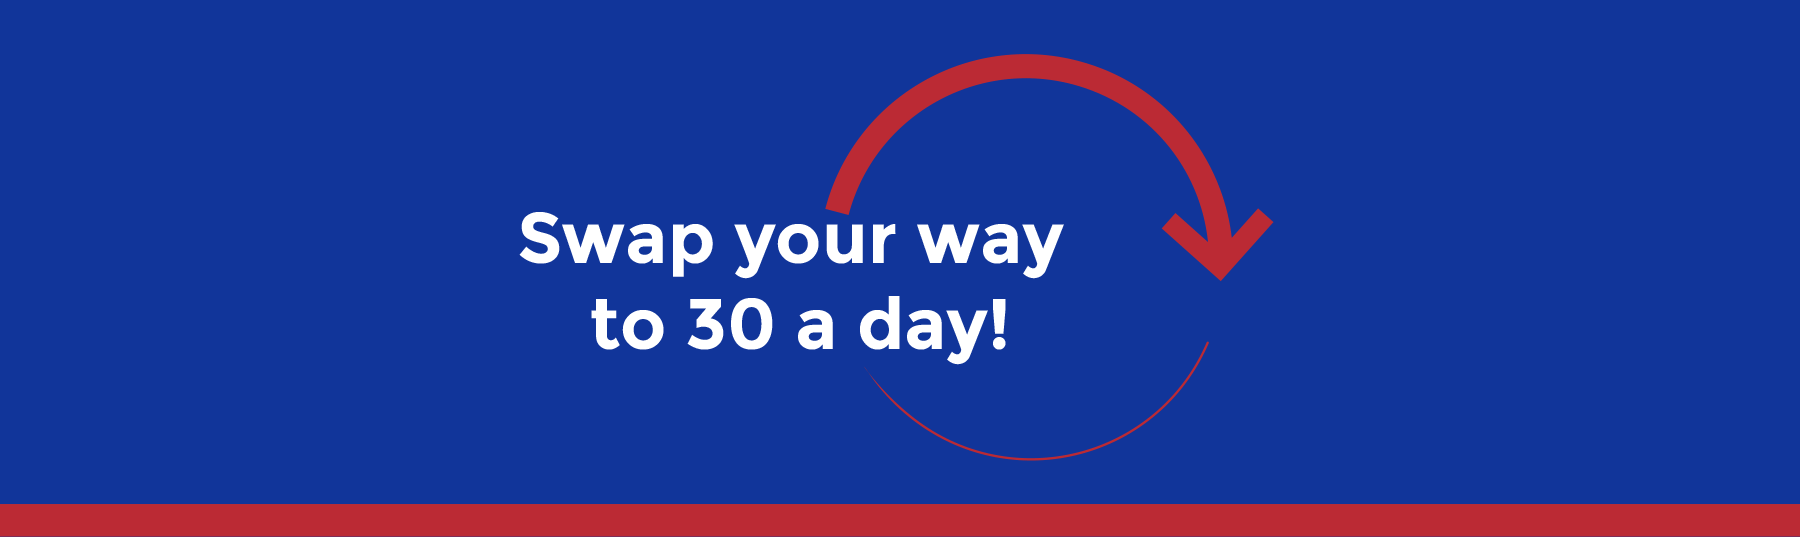 Swap your way to 30 a day!